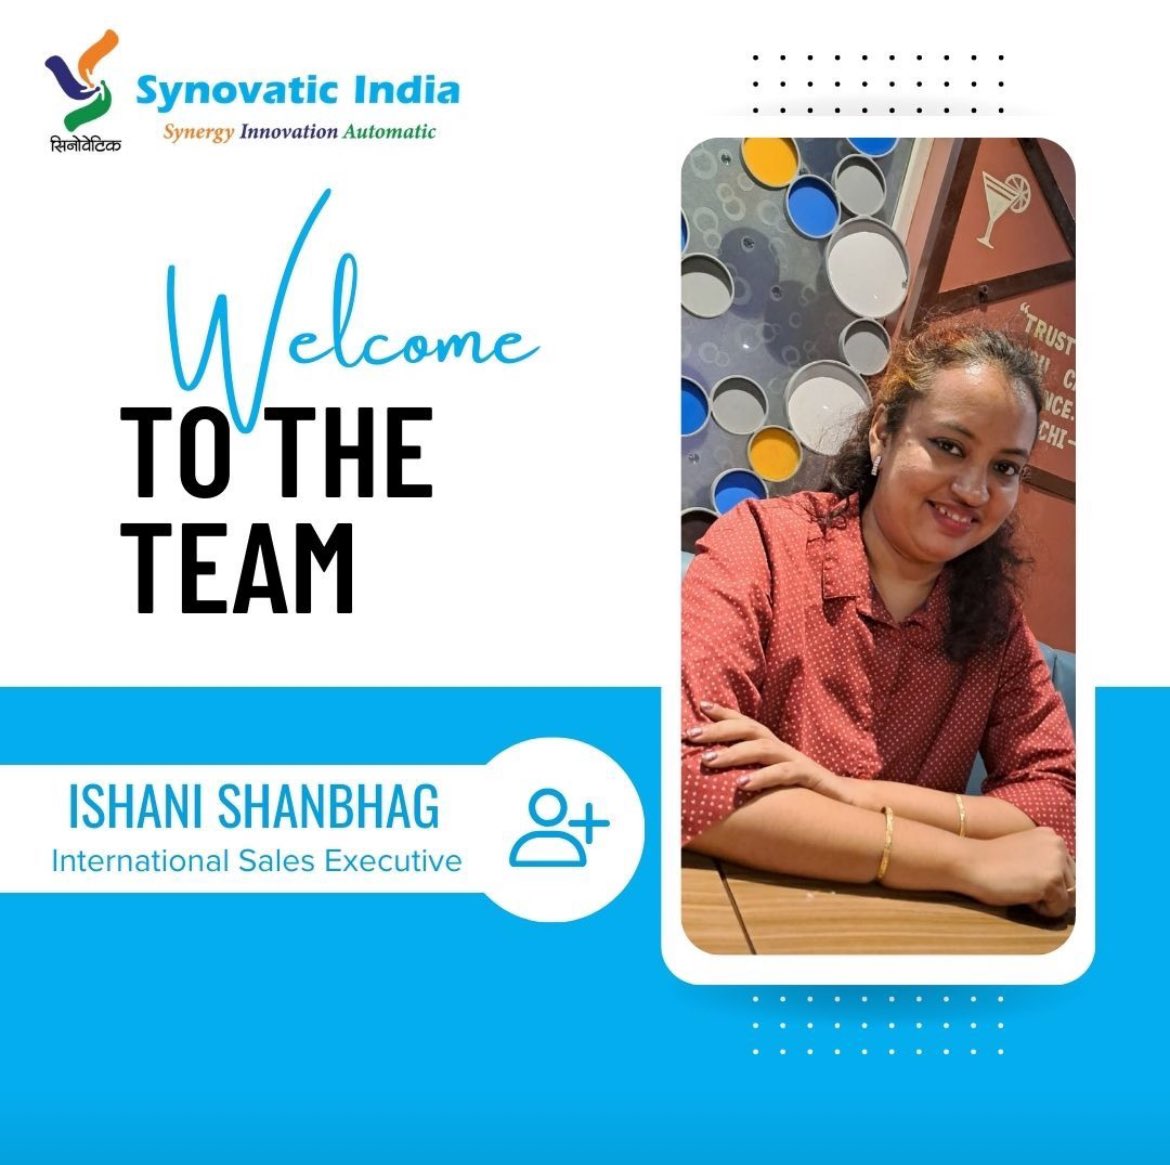 👋 Introducing Ishani Shanbhag, the newest addition to our team at Synovatic India Machinery Pvt. Ltd.! 
🌟 Let's give her a warm welcome as she joins us in shaping the future of our company. 
#newhire #welcomeaboard #welcome #teamspirit